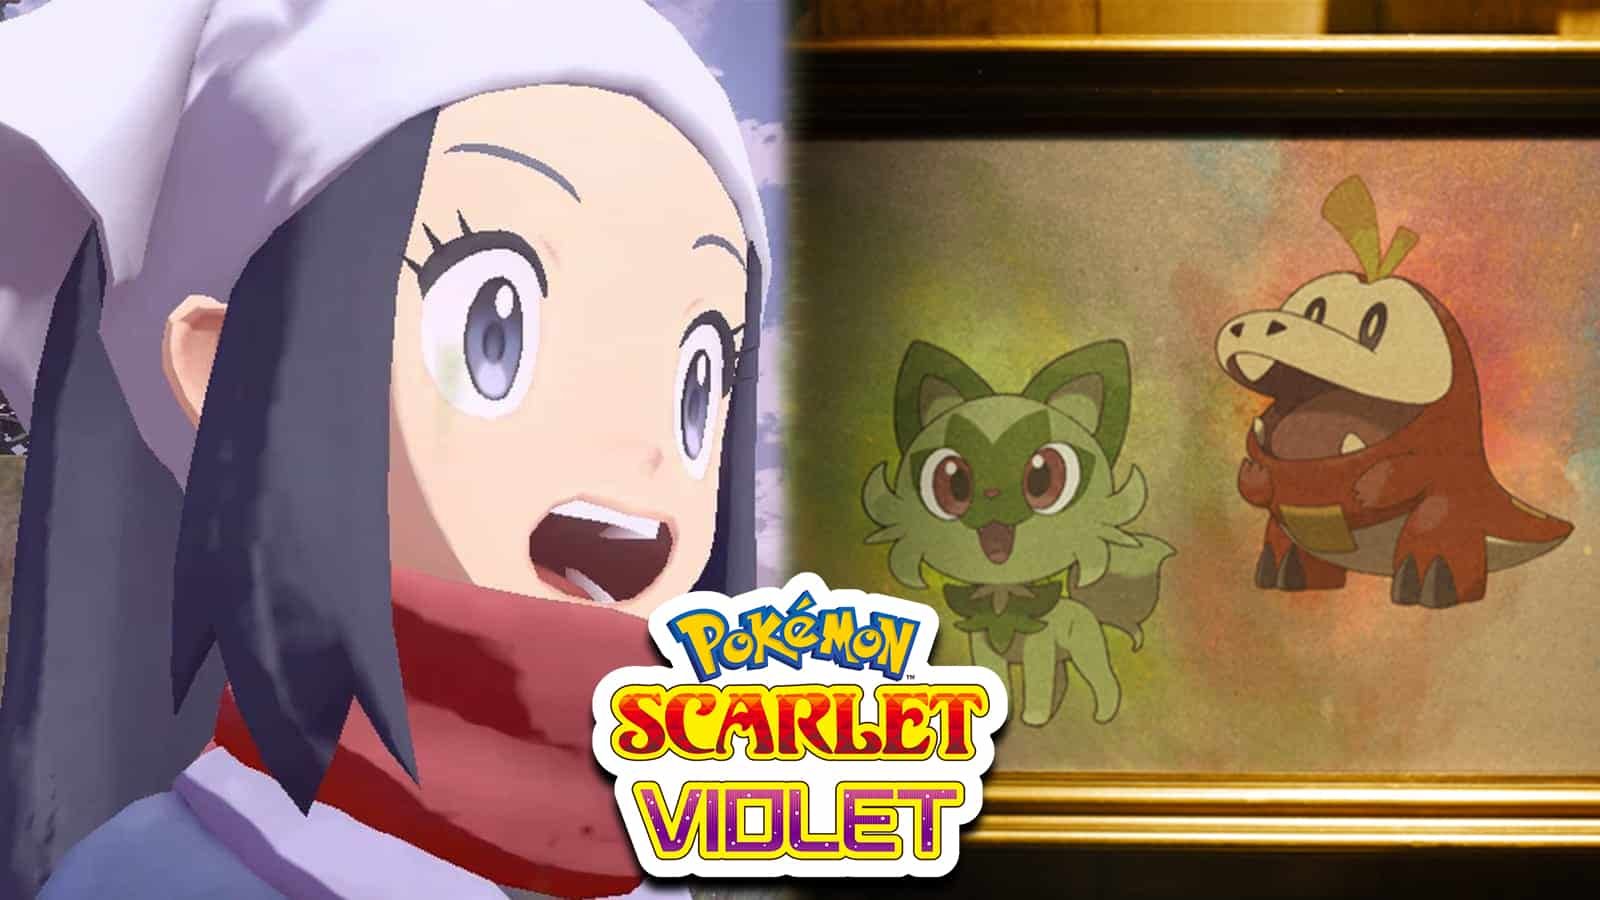 Pokémon Scarlet and Violet: What is the Release Date?